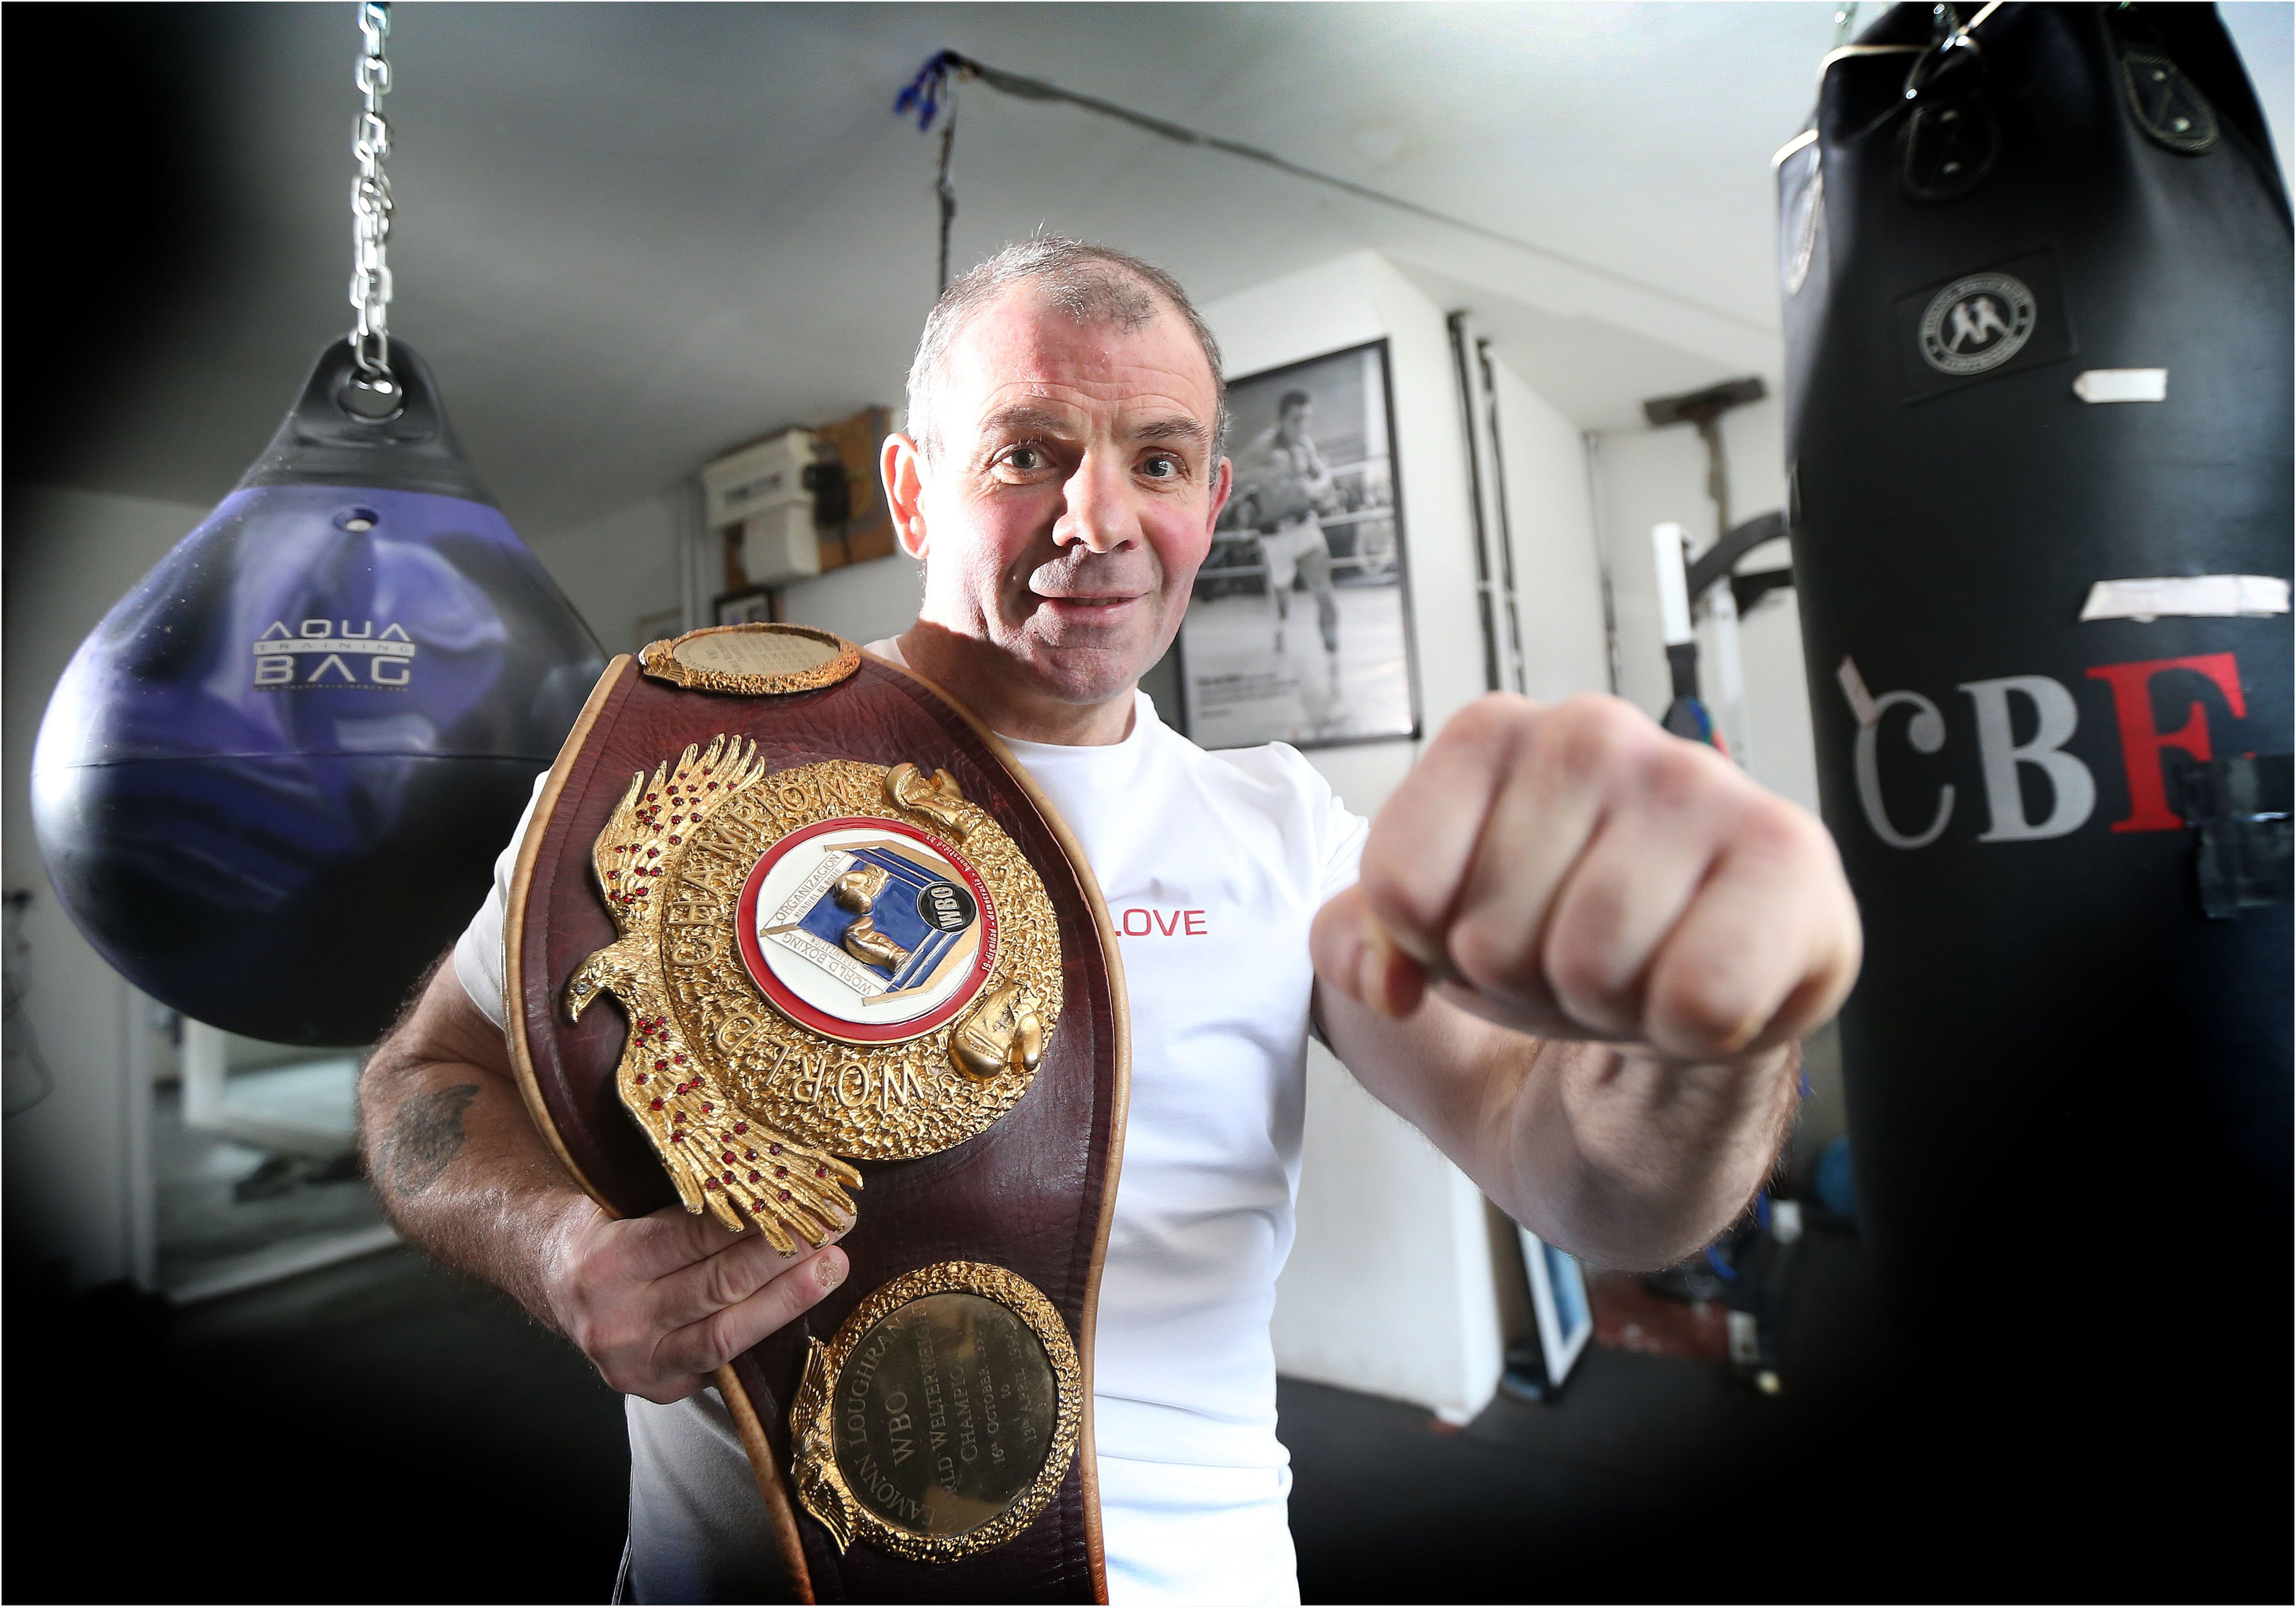 Running in the right direction - former boxer Eamon Loughran